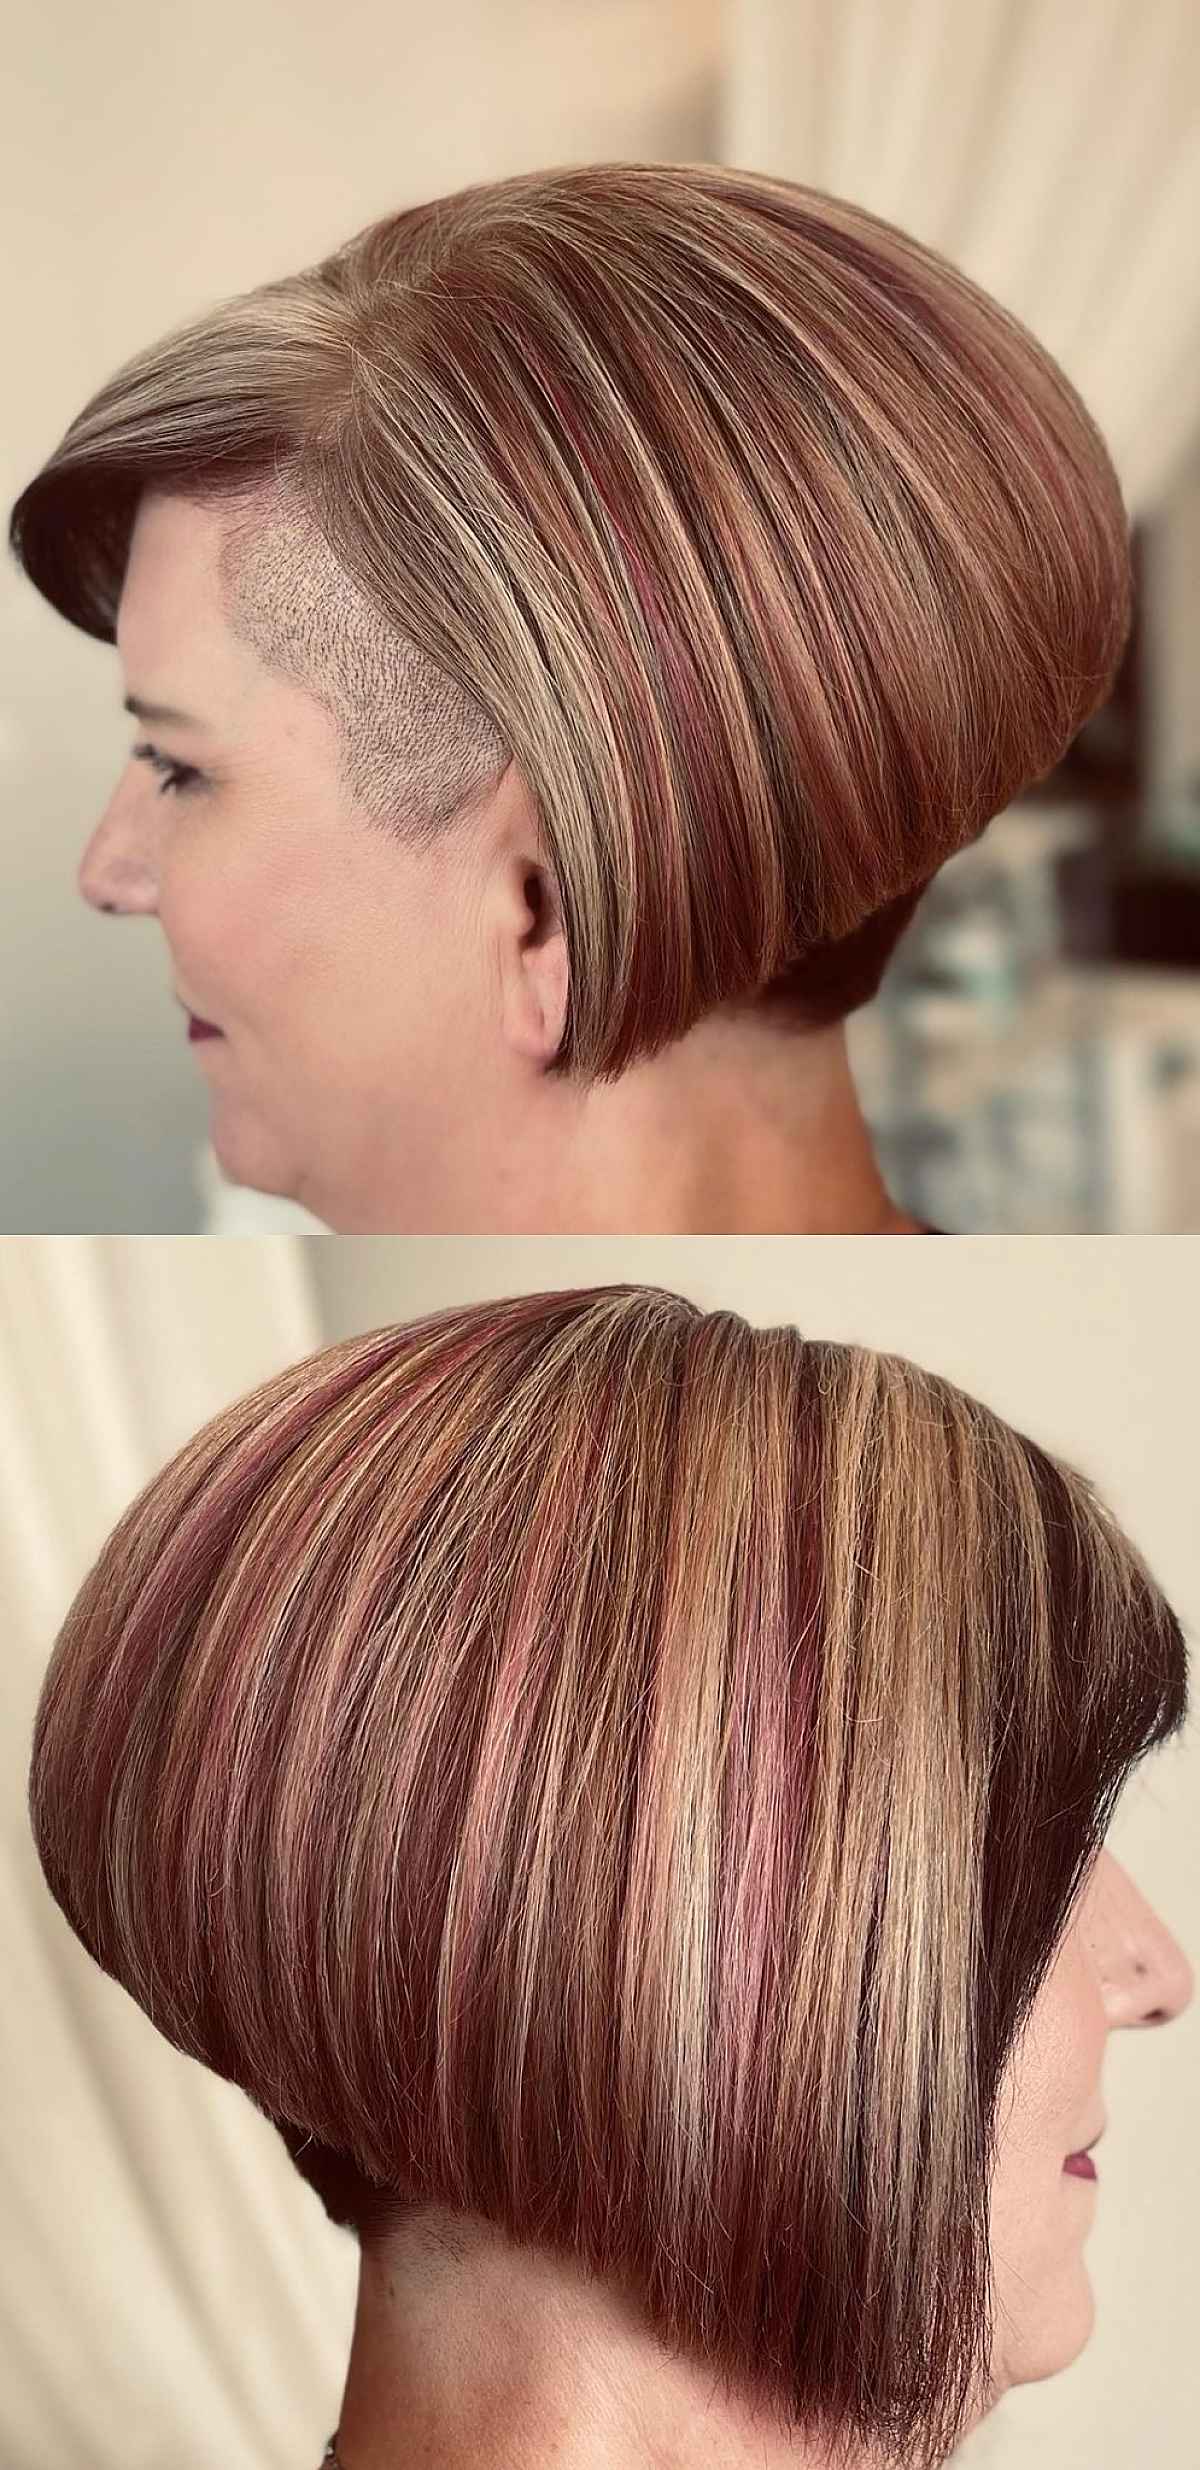 22 Undercut Pixie Bob Haircuts To Consider for a Short &amp; Easy Cut to Style